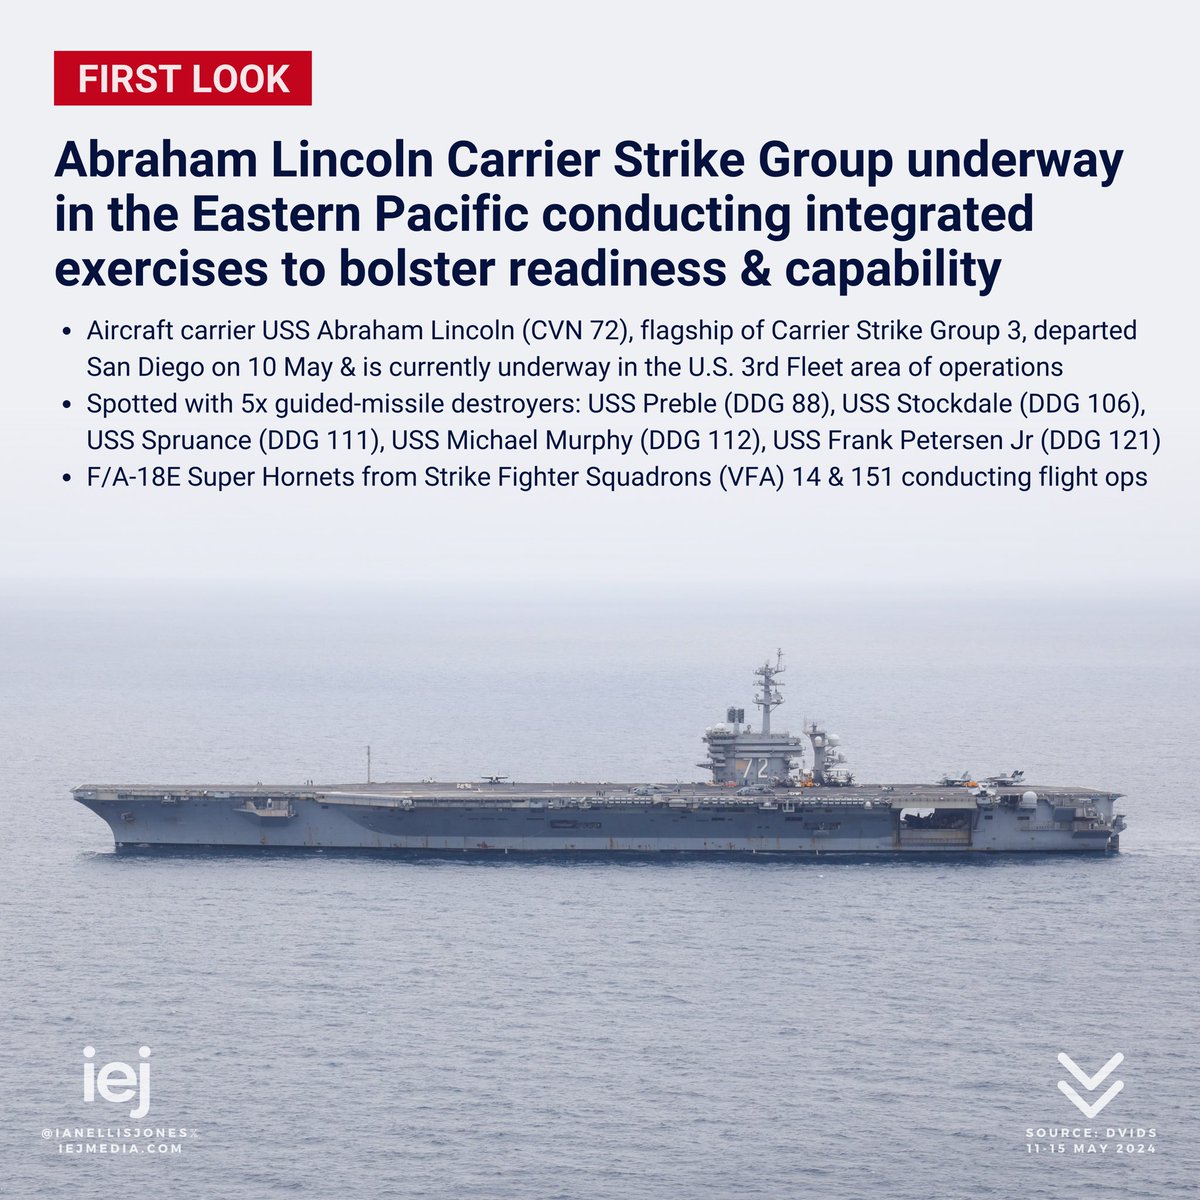 First look at the Abraham Lincoln carrier strike group 👀 USS Abraham Lincoln (CVN 72) & 5 guided-missile destroyers are underway conducting exercises off the west coast. The CSG is preparing for a Pacific deployment & this is the first time the composition has been revealed: